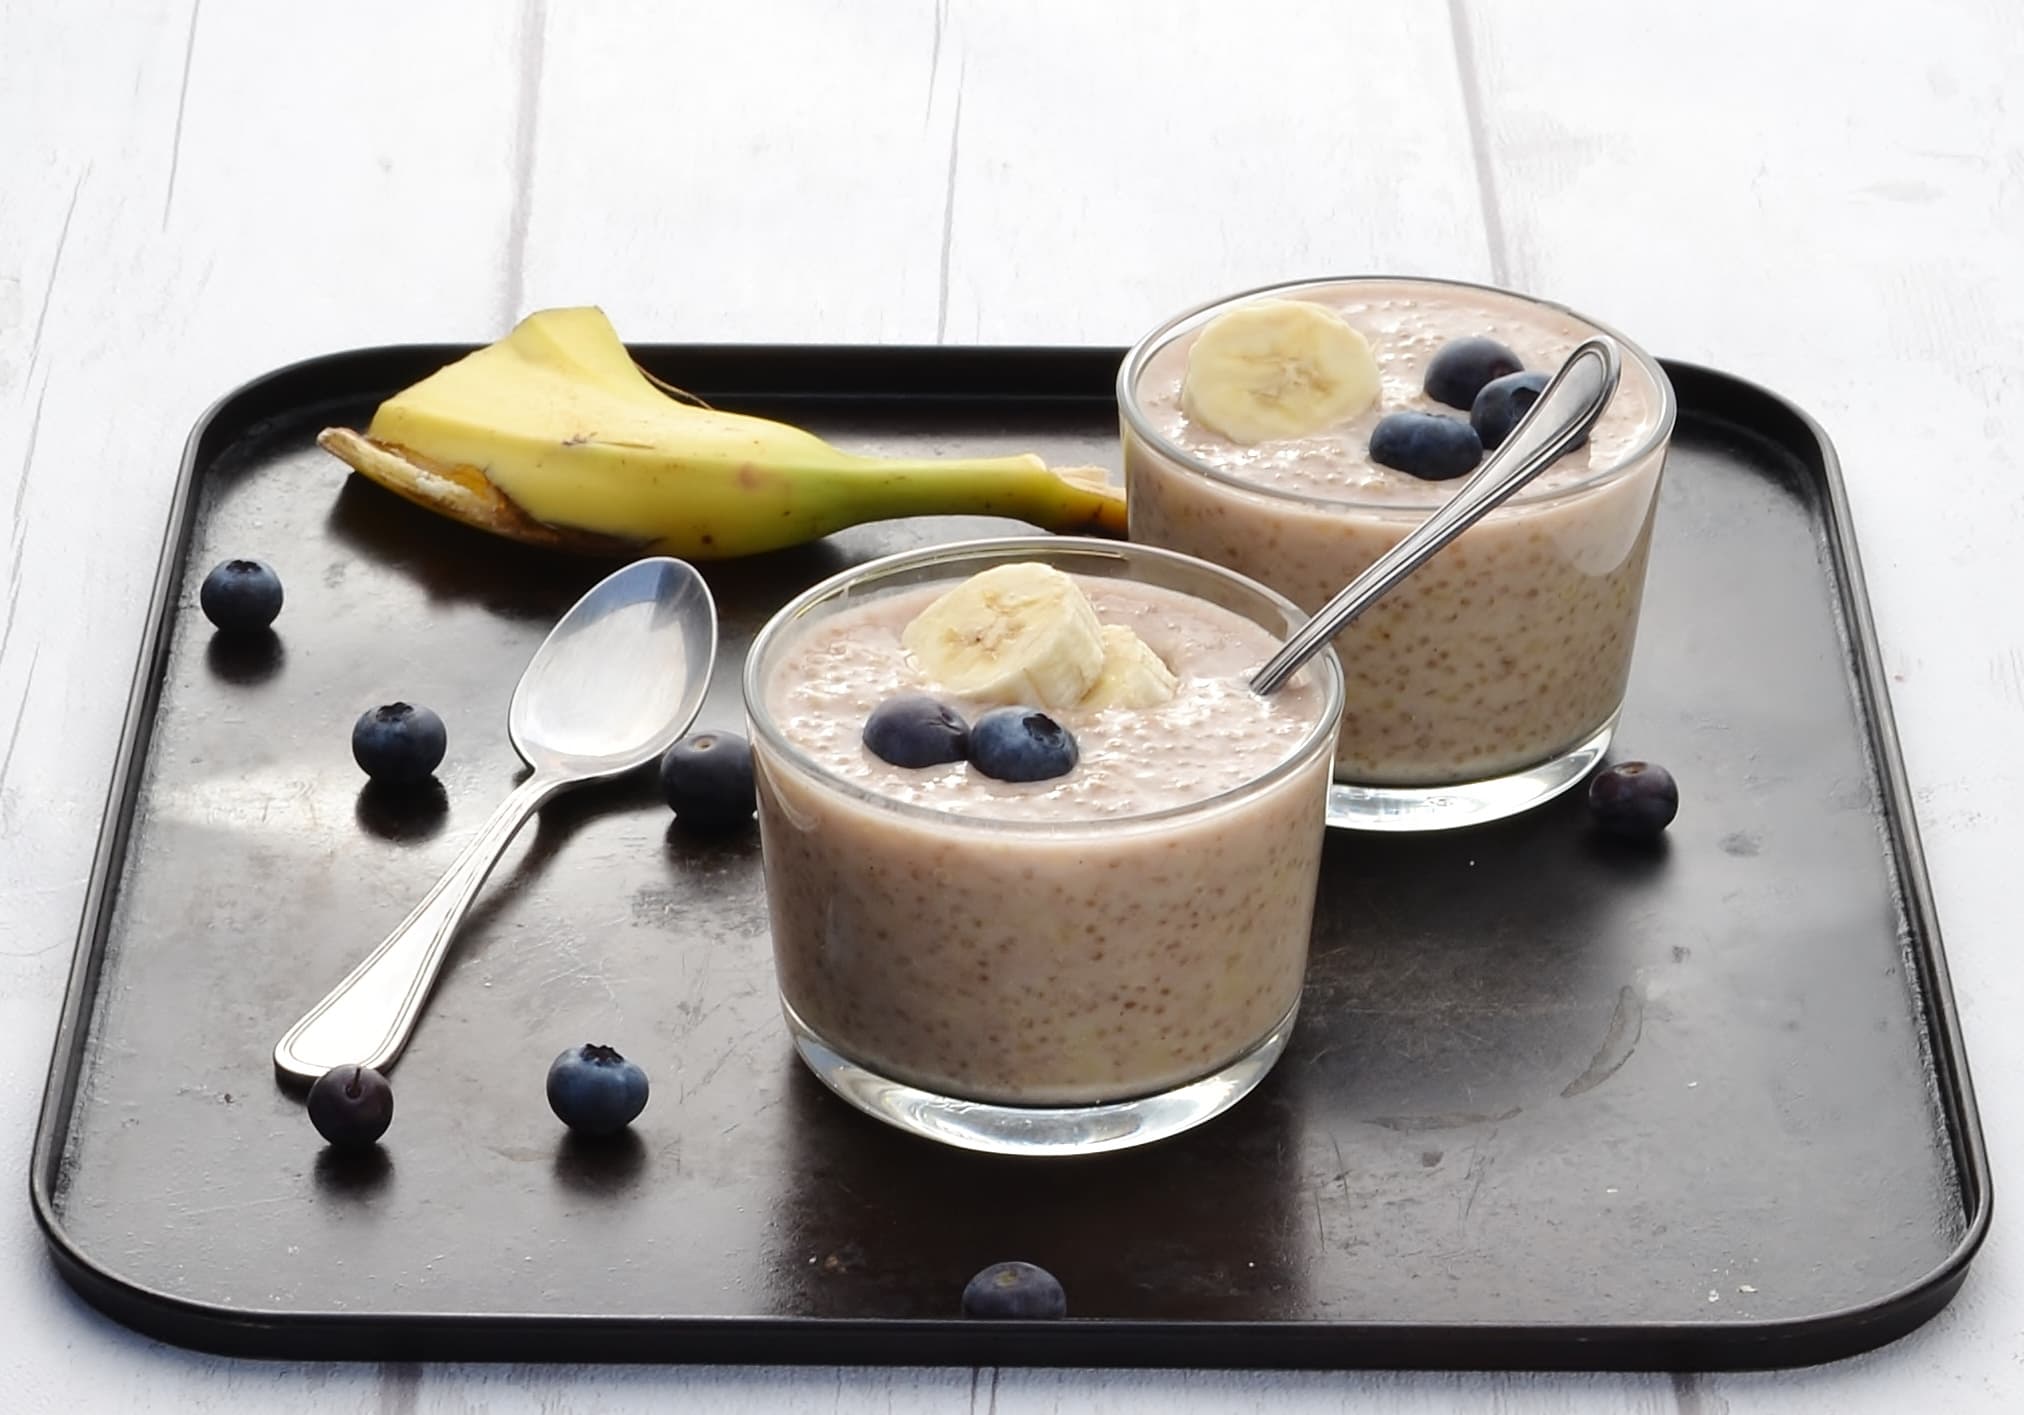 Side view of overnight quinoa with banana slices and blueberries in 2 cups with spoon, another spoon, blueberries and banana peel on dark table.